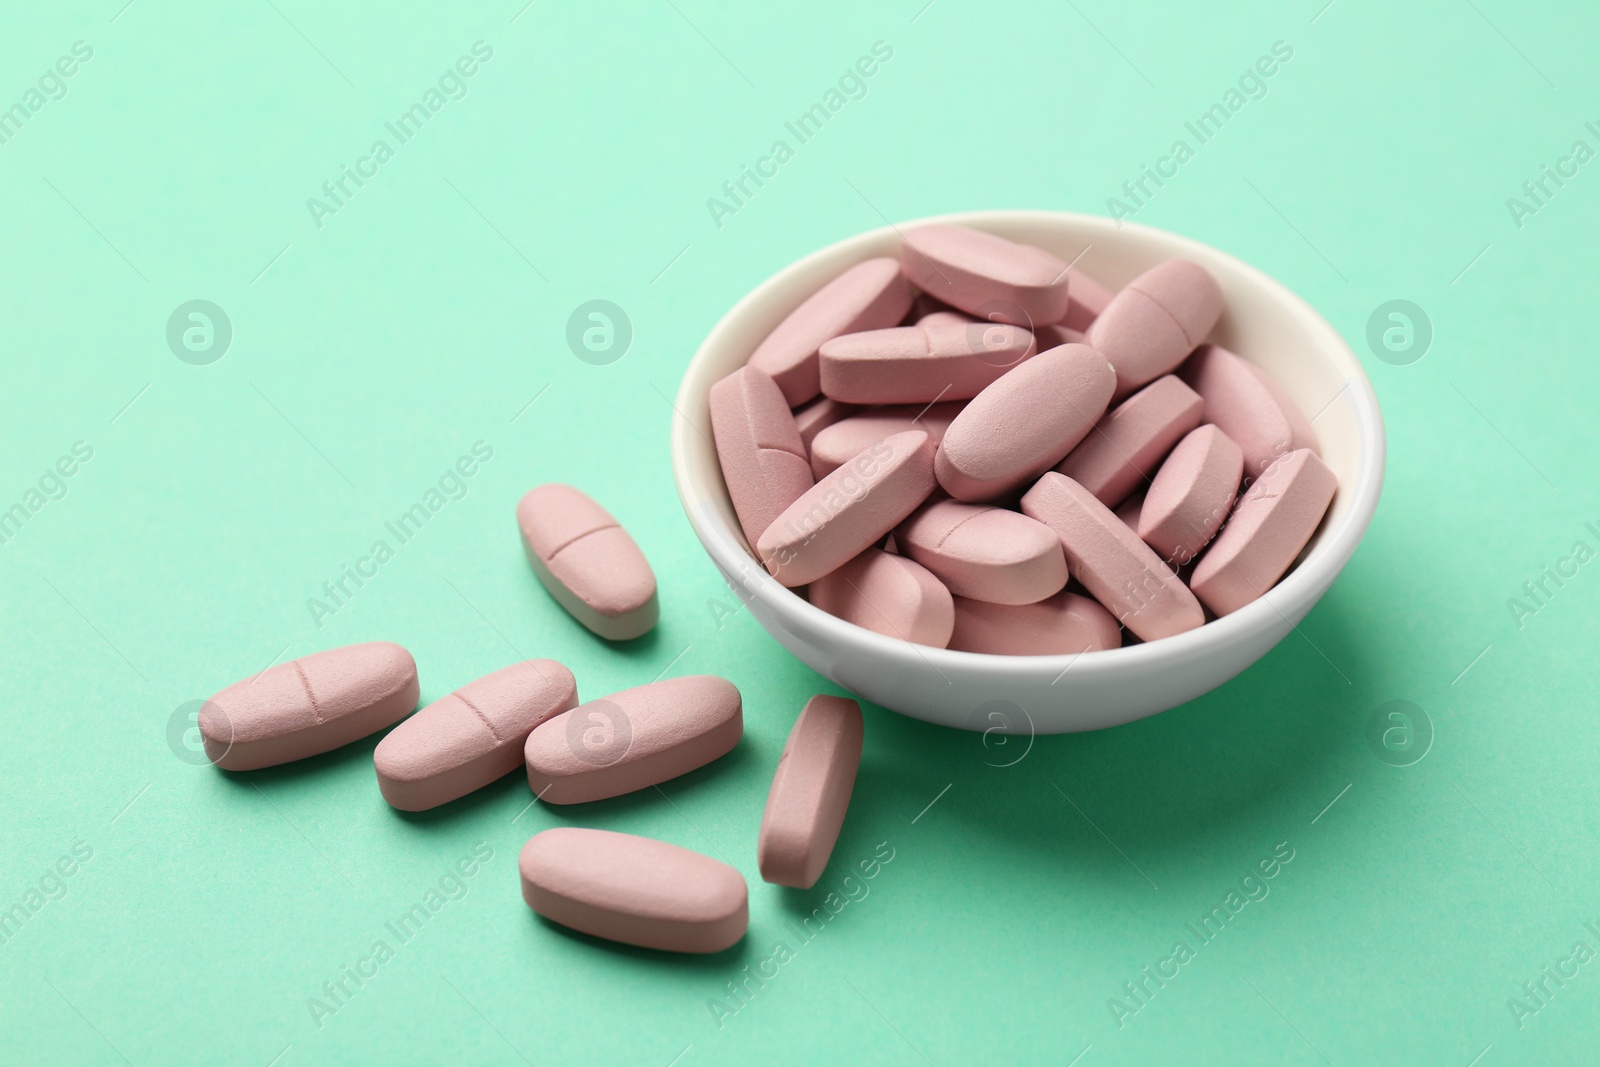 Photo of Pink vitamin capsules and bowl on turquoise background